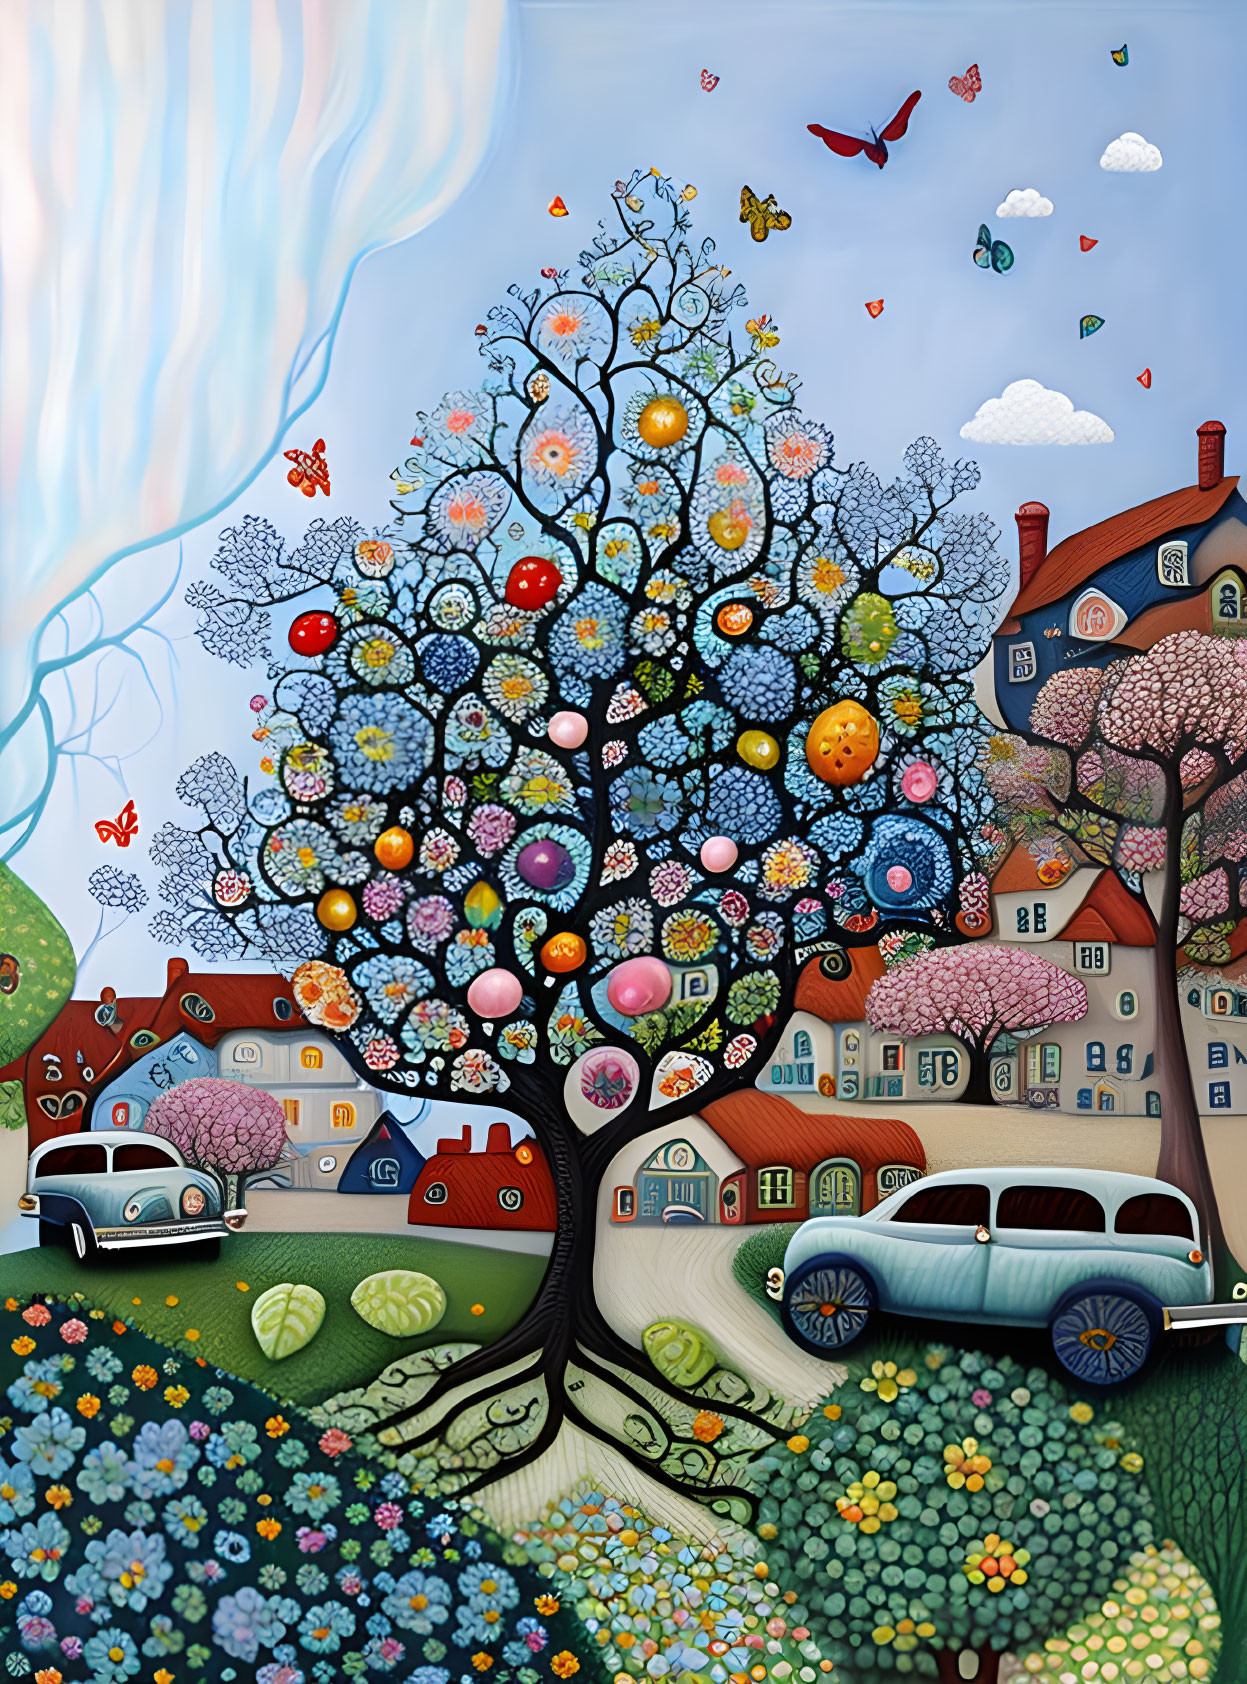 Colorful Painting of Vibrant Tree, Birds, Butterflies, and Village